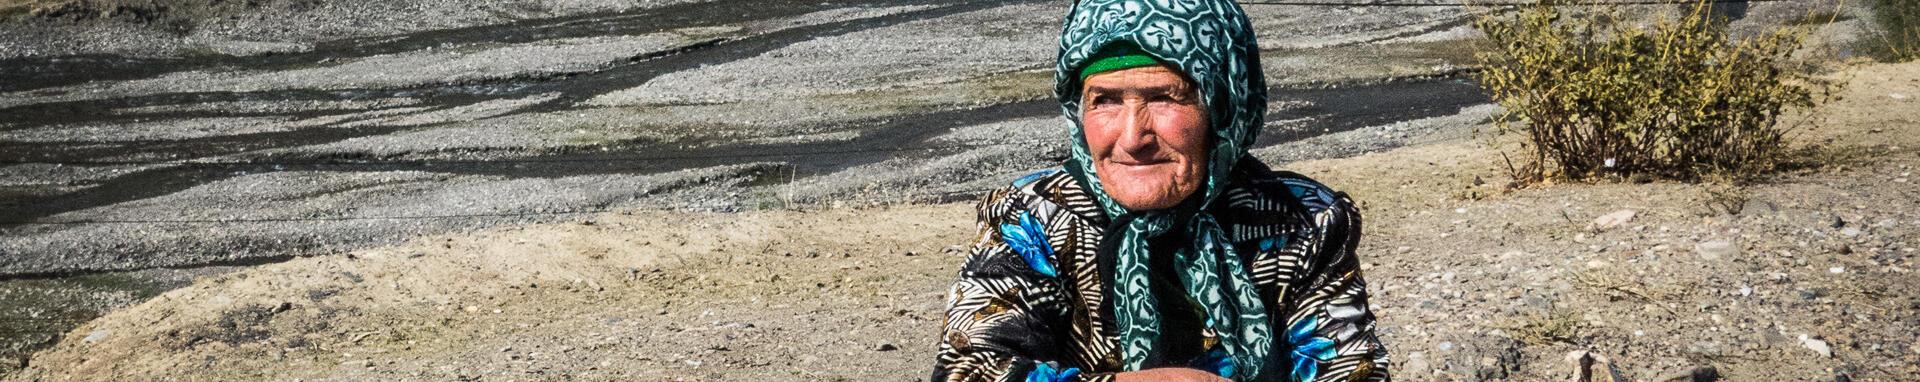 CIF Action Woman in Tajikistan. Photos by EBRD/Chris Booth